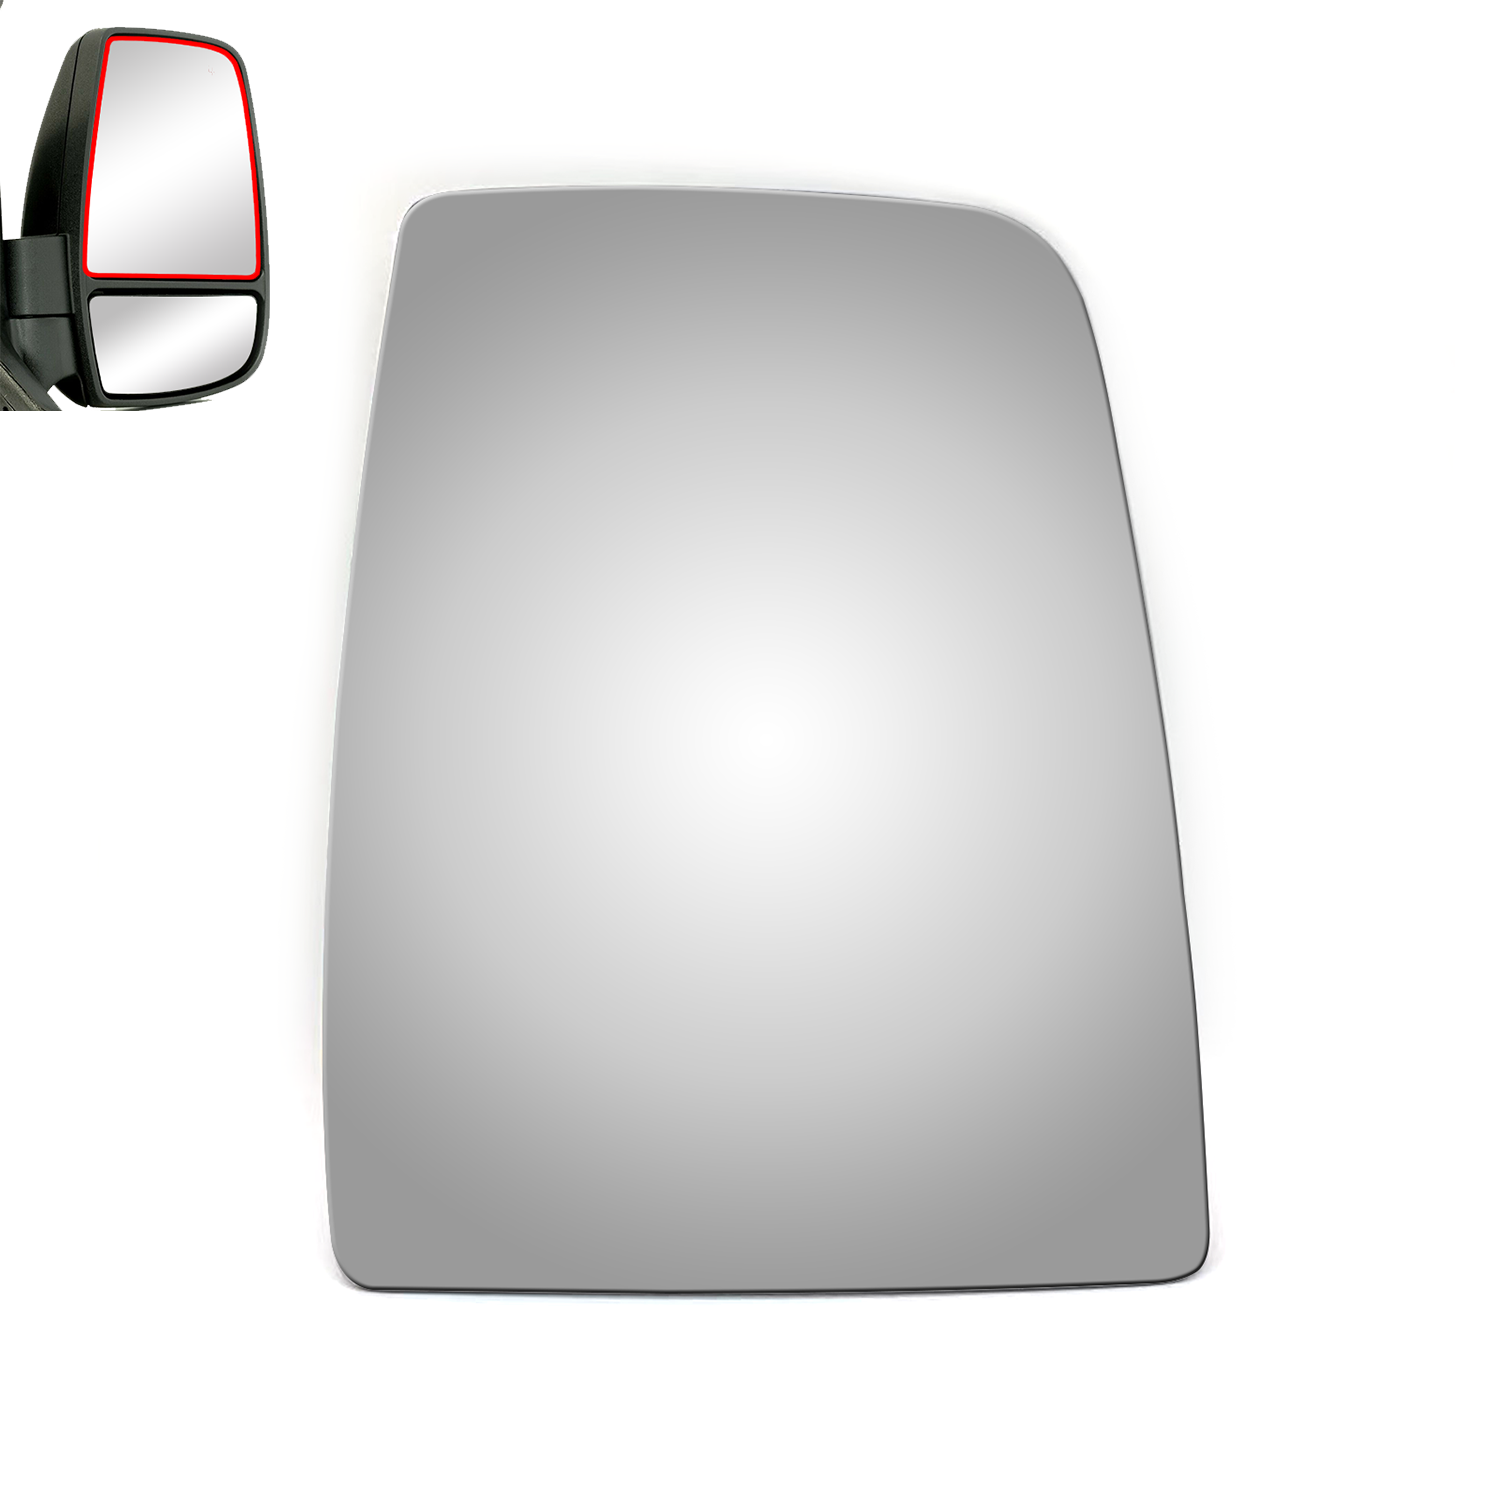 WLLW Upper Mirror Glass Replacement for 2015-2021 Ford Transit 150/250/350/350 HD, 2022-2023 E-TRANSIT, Driver Left Side LH/Passenger Right Side RH/The Both Sides Flat Convex M-0070